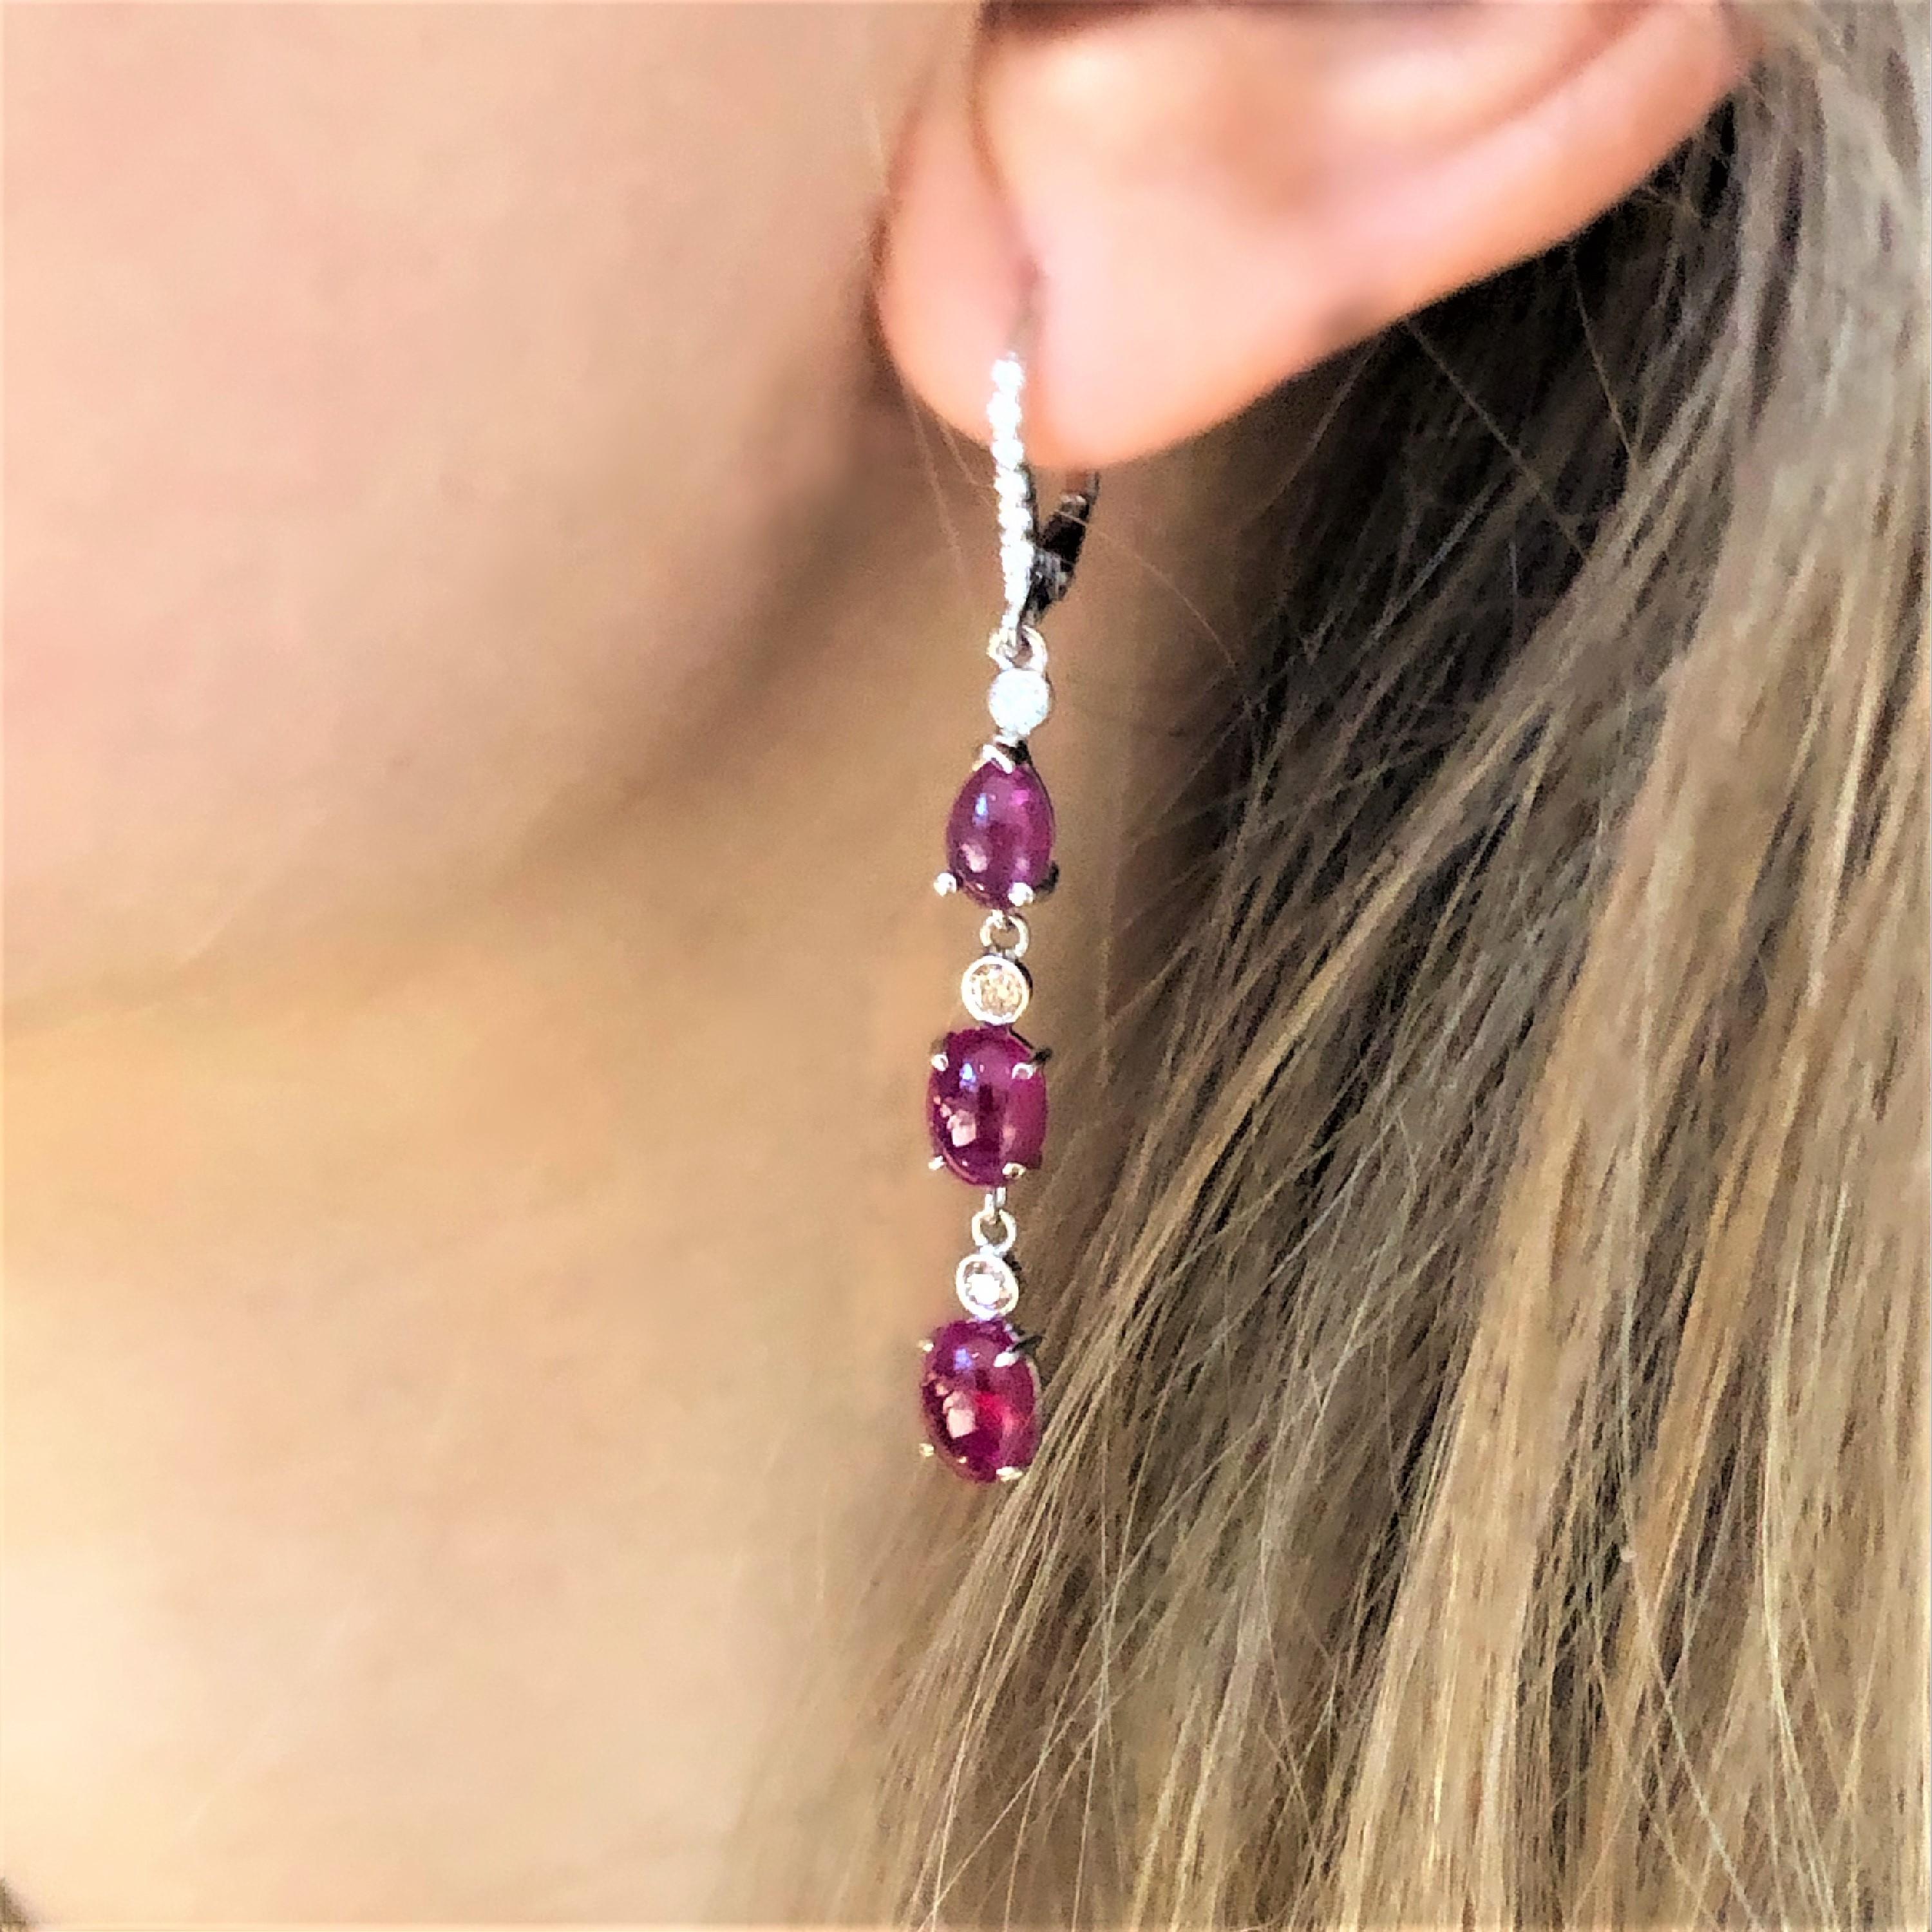 Fourteen karats white gold hoop drop earrings two-inch long
White diamonds weighing 0.30 carat 
Pear shape and oval shape Burma cabochon rubies weighing 7.85 carat
Four Champagne diamonds weighing 0.12 carat
One of a kind earring
New